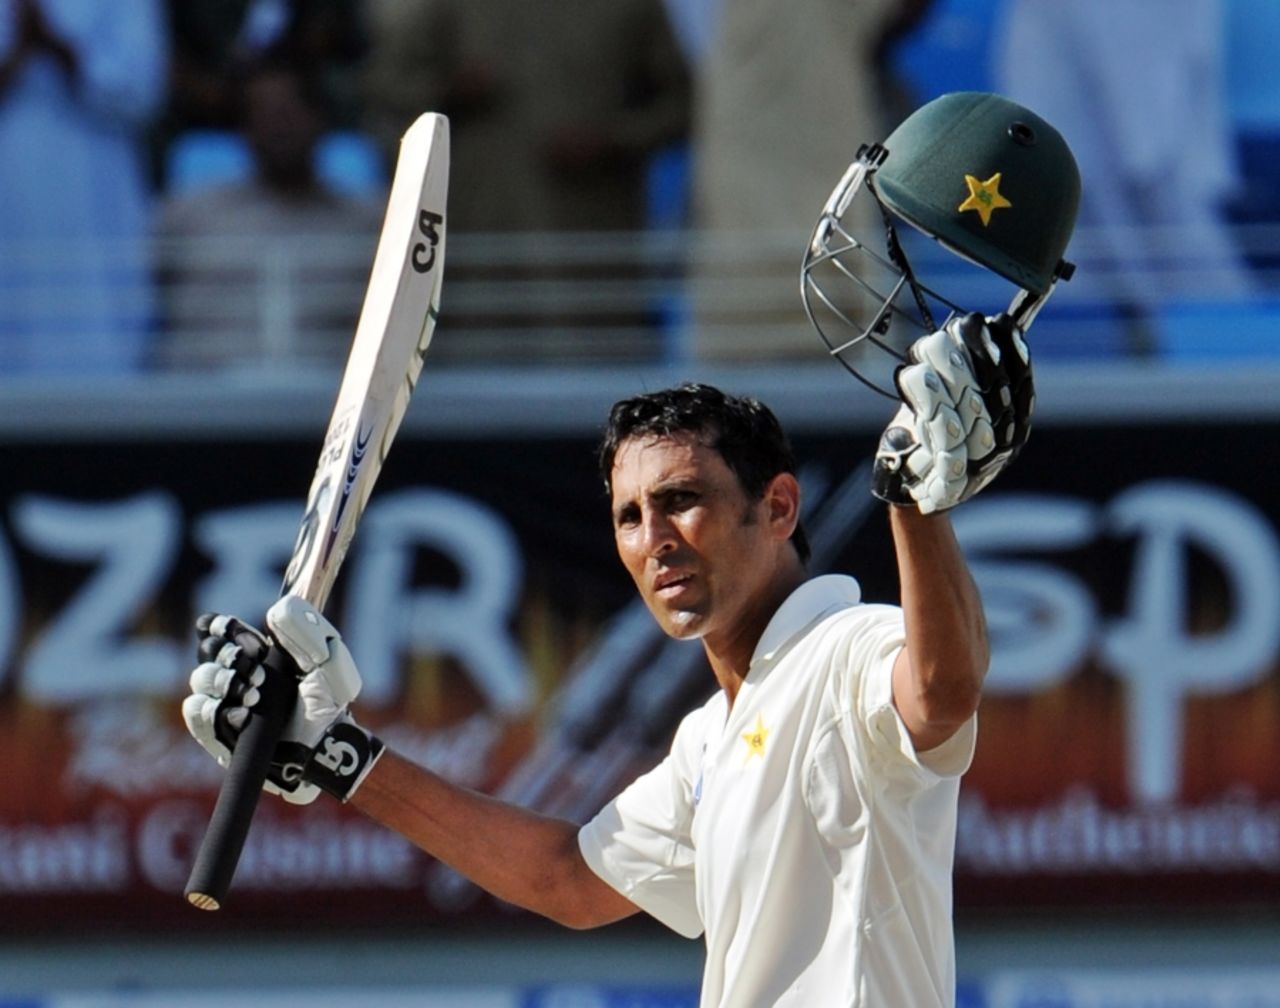 Younis Khan celebrates his fourth-innings century against South Africa, Pakistan v South Africa, 1st Test, Dubai, November 16, 2010